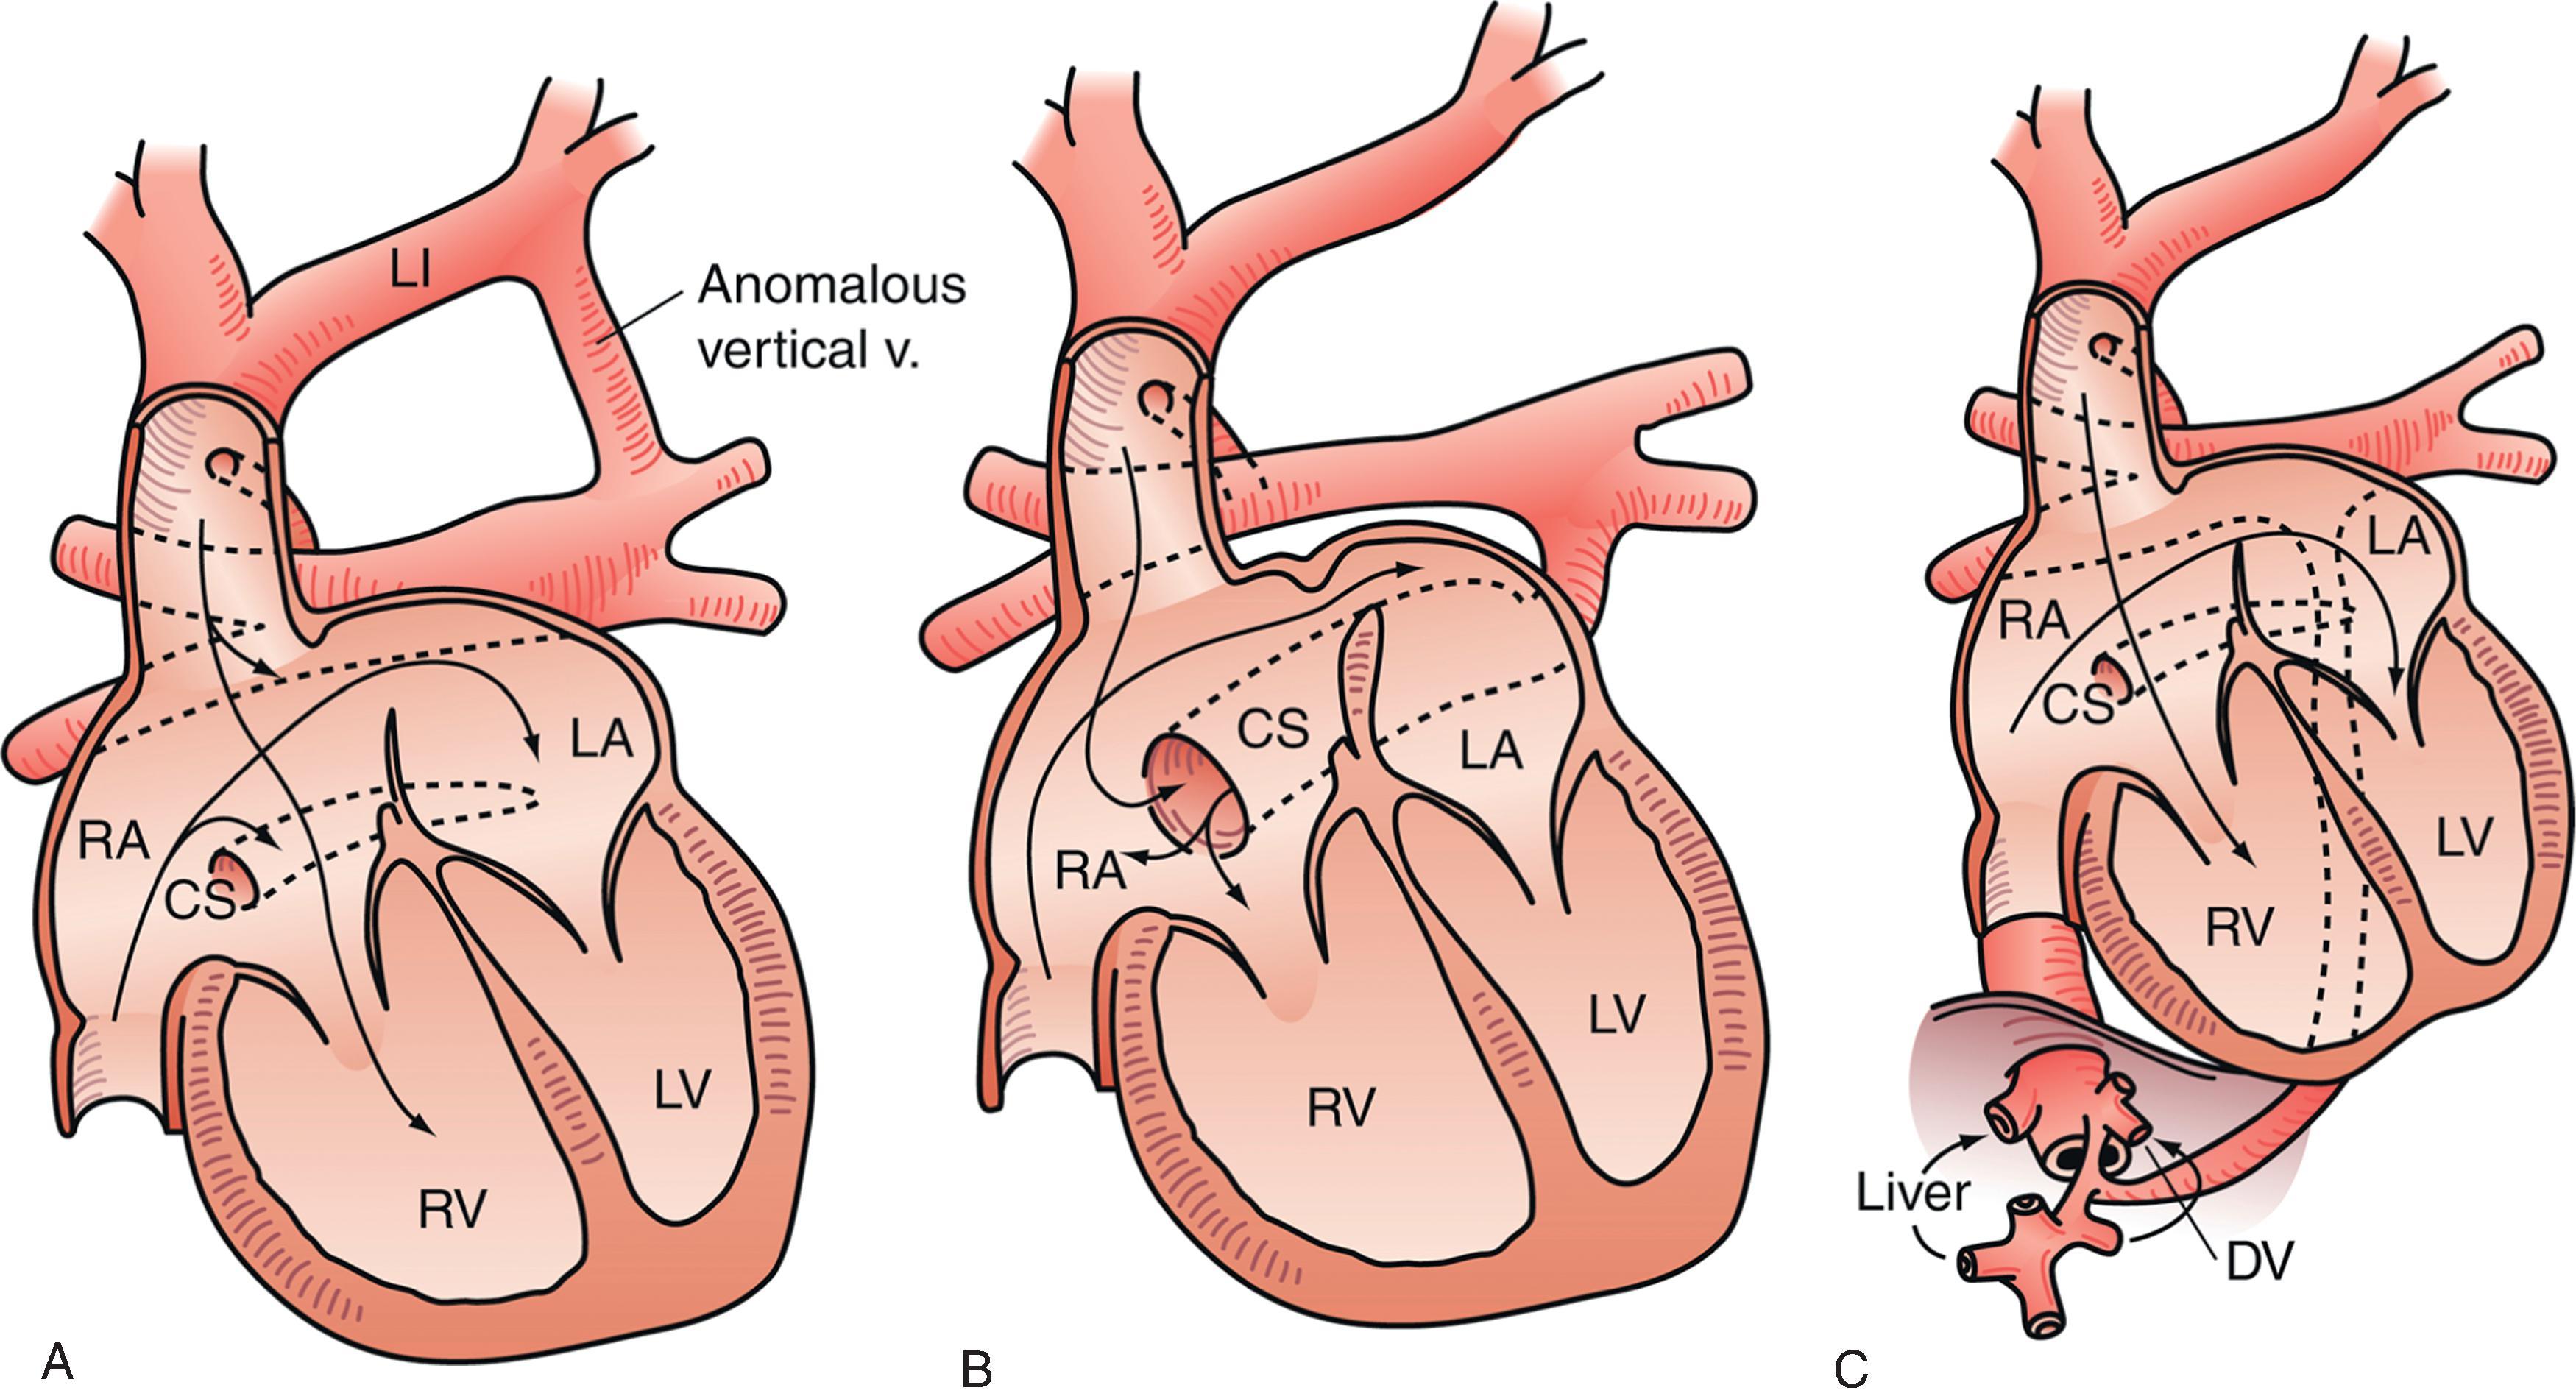 Fig. 36.6, Types of Total Anomalous Pulmonary Venous Connection (TAPVC). (A) Supracardiac type with a vertical vein joining the left innominate (LI) vein. (B) Intracardiac, connected to the coronary sinus (CS). (C) Infracardiac type with drainage through the diaphragm via an inferior connecting vein. DV , Ductus venosus; LA, left atrium; LV, left ventricle; RA, right atrium; RV, right ventricle. (This figure was modified and reproduced with permission from Hammon JW Jr, Bender HW Jr. Anomalous venous connections: pulmonary and systemic.)